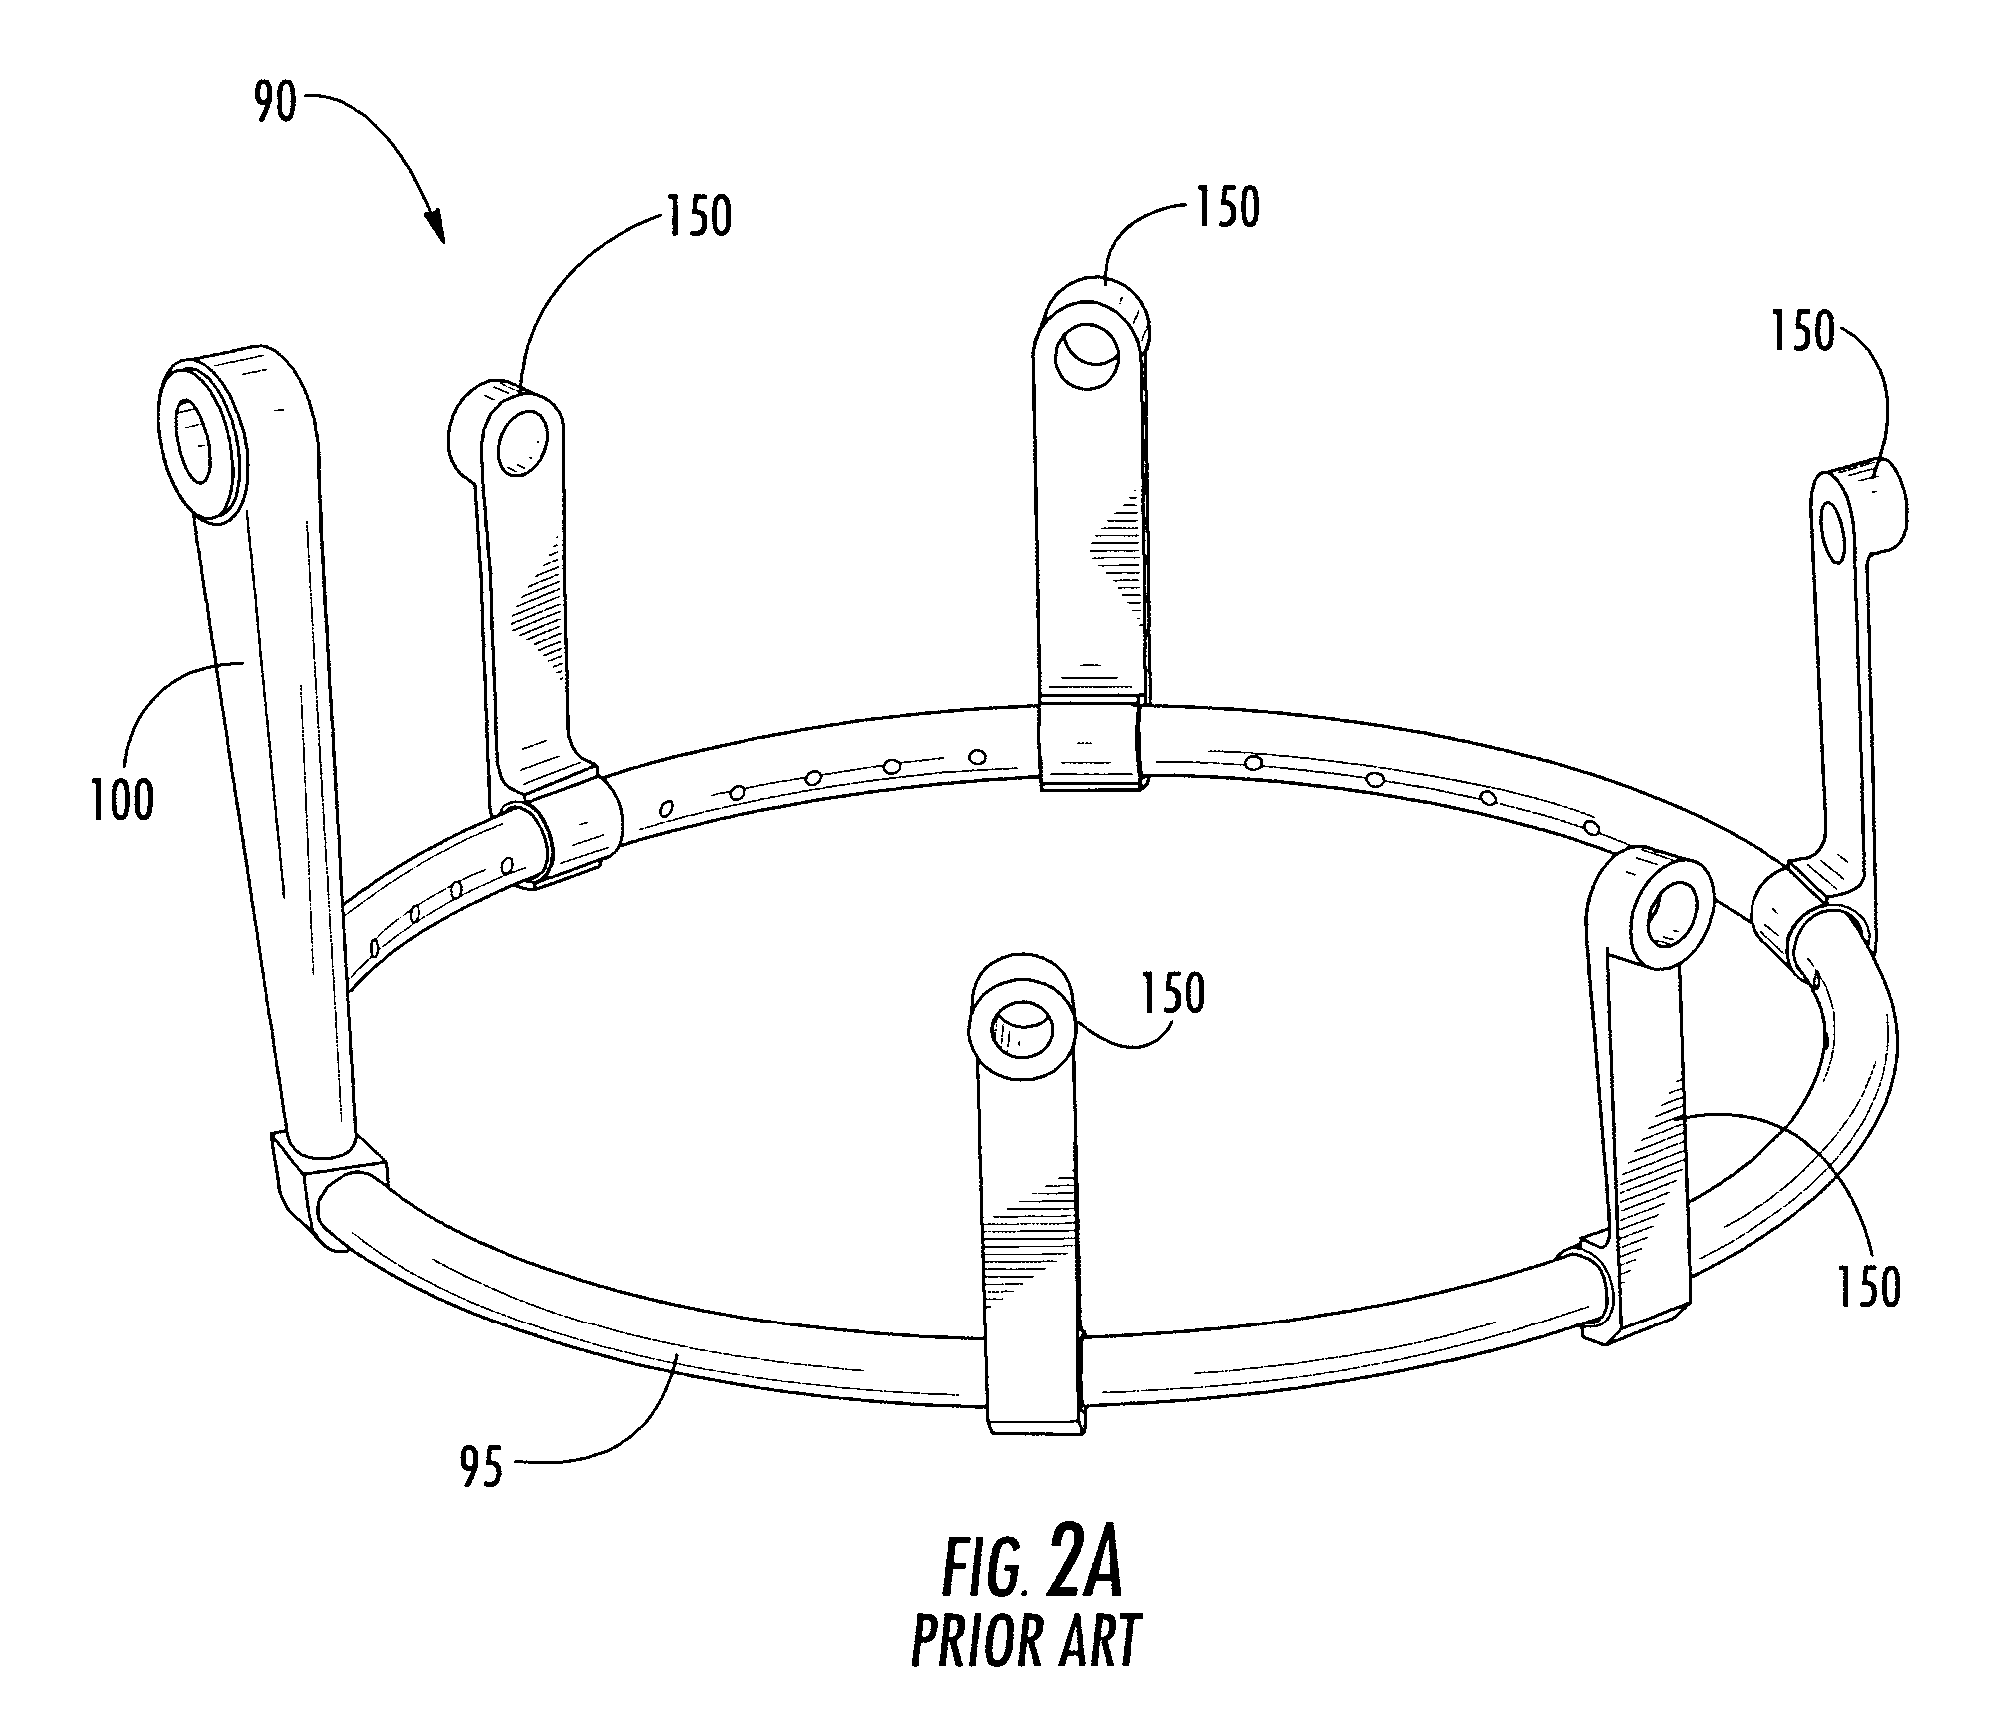 Turbine fuel ring assembly